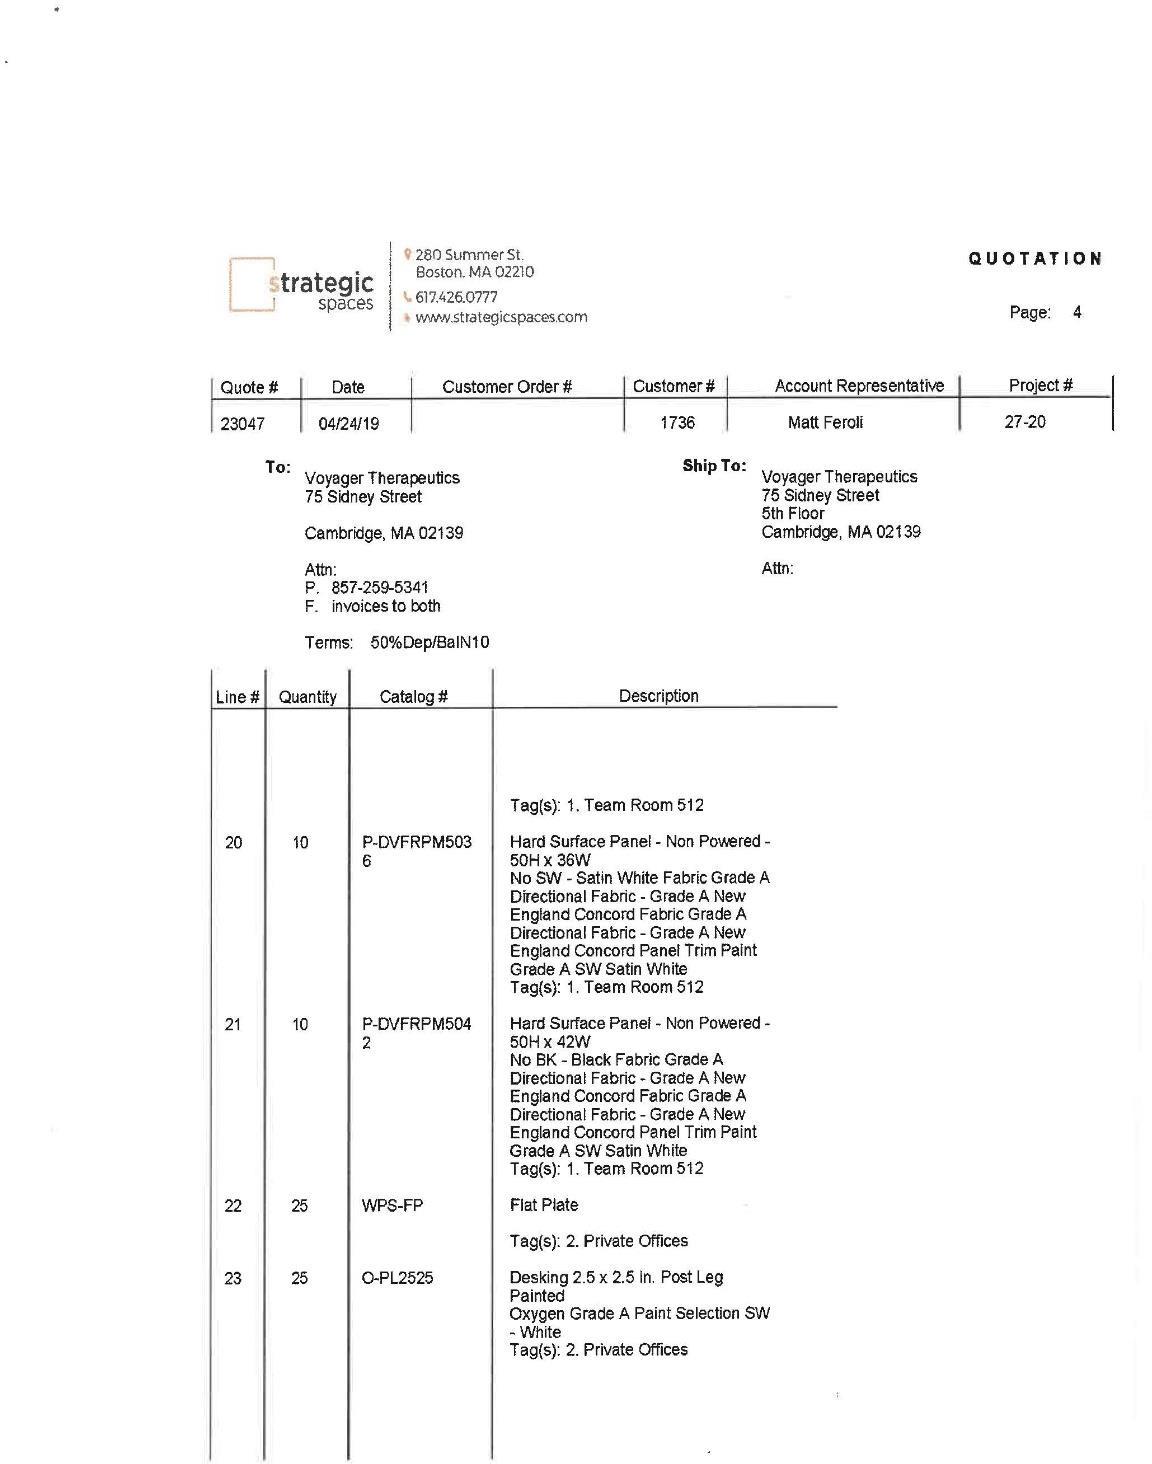 Ex C to Voyager BioNTech Sublease Agreement_Page_04